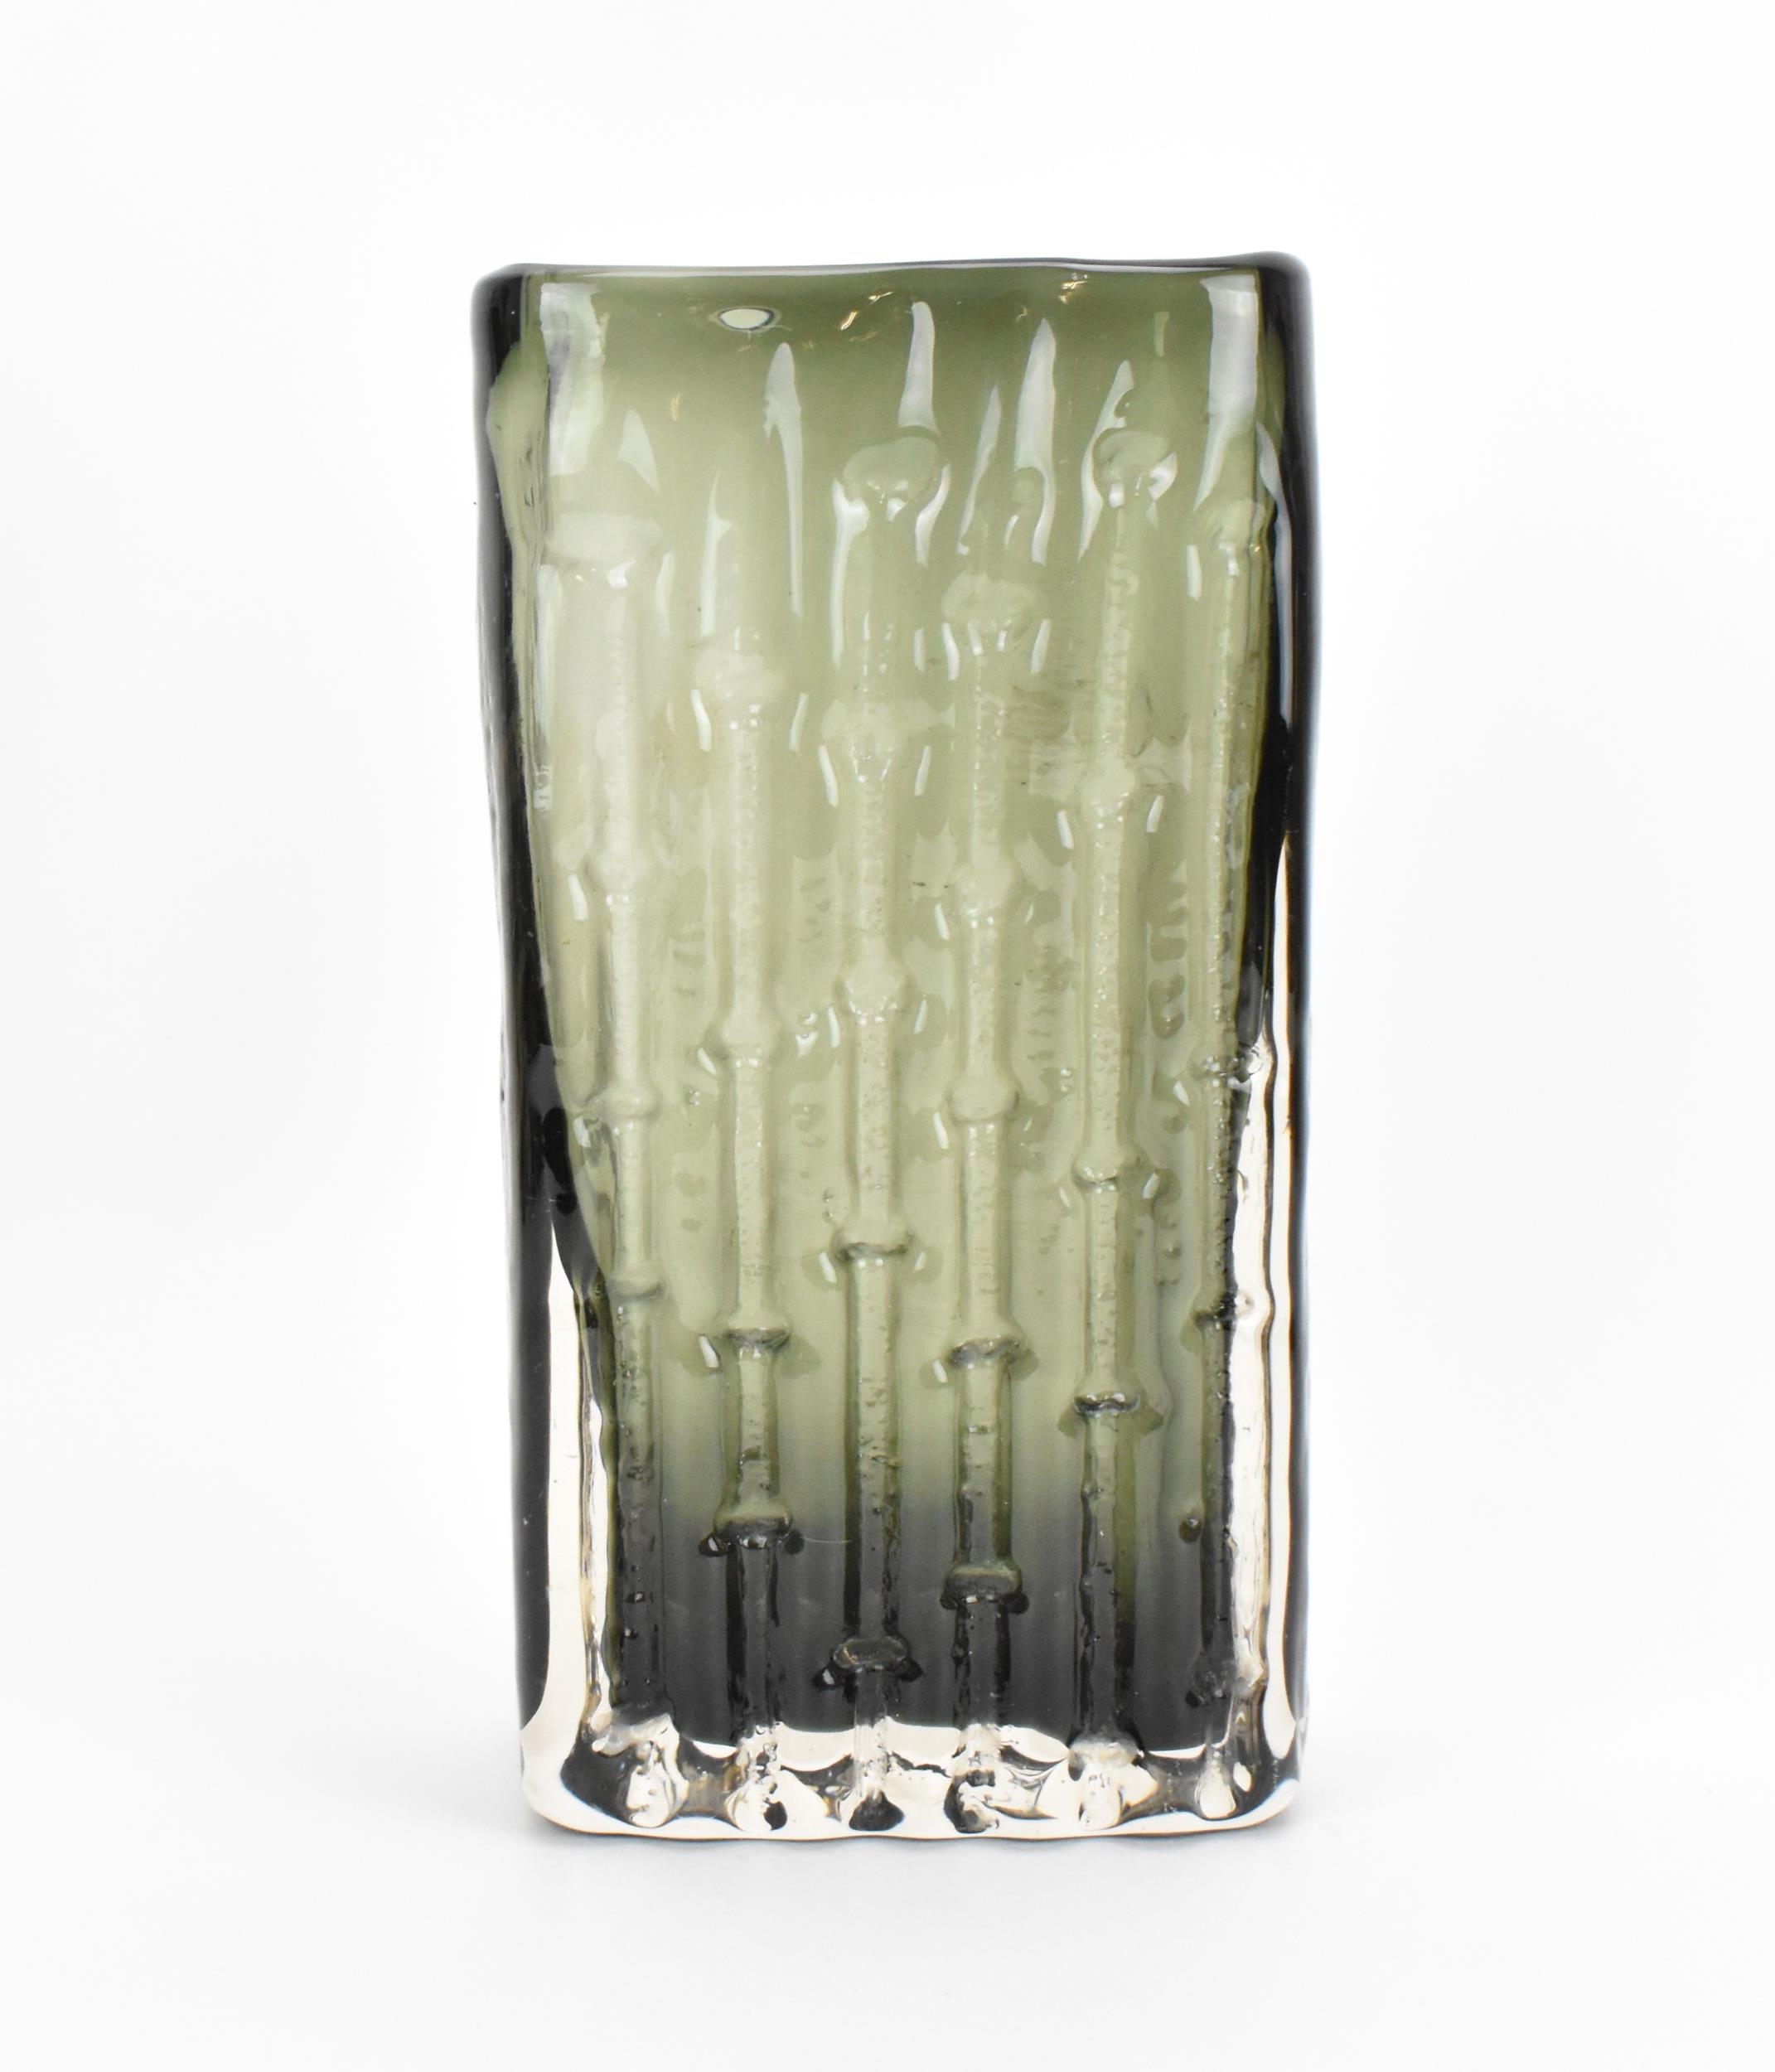 A Whitefriars willow 'bamboo' vase designed by Geoffrey Baxter, pattern 9669, with textured